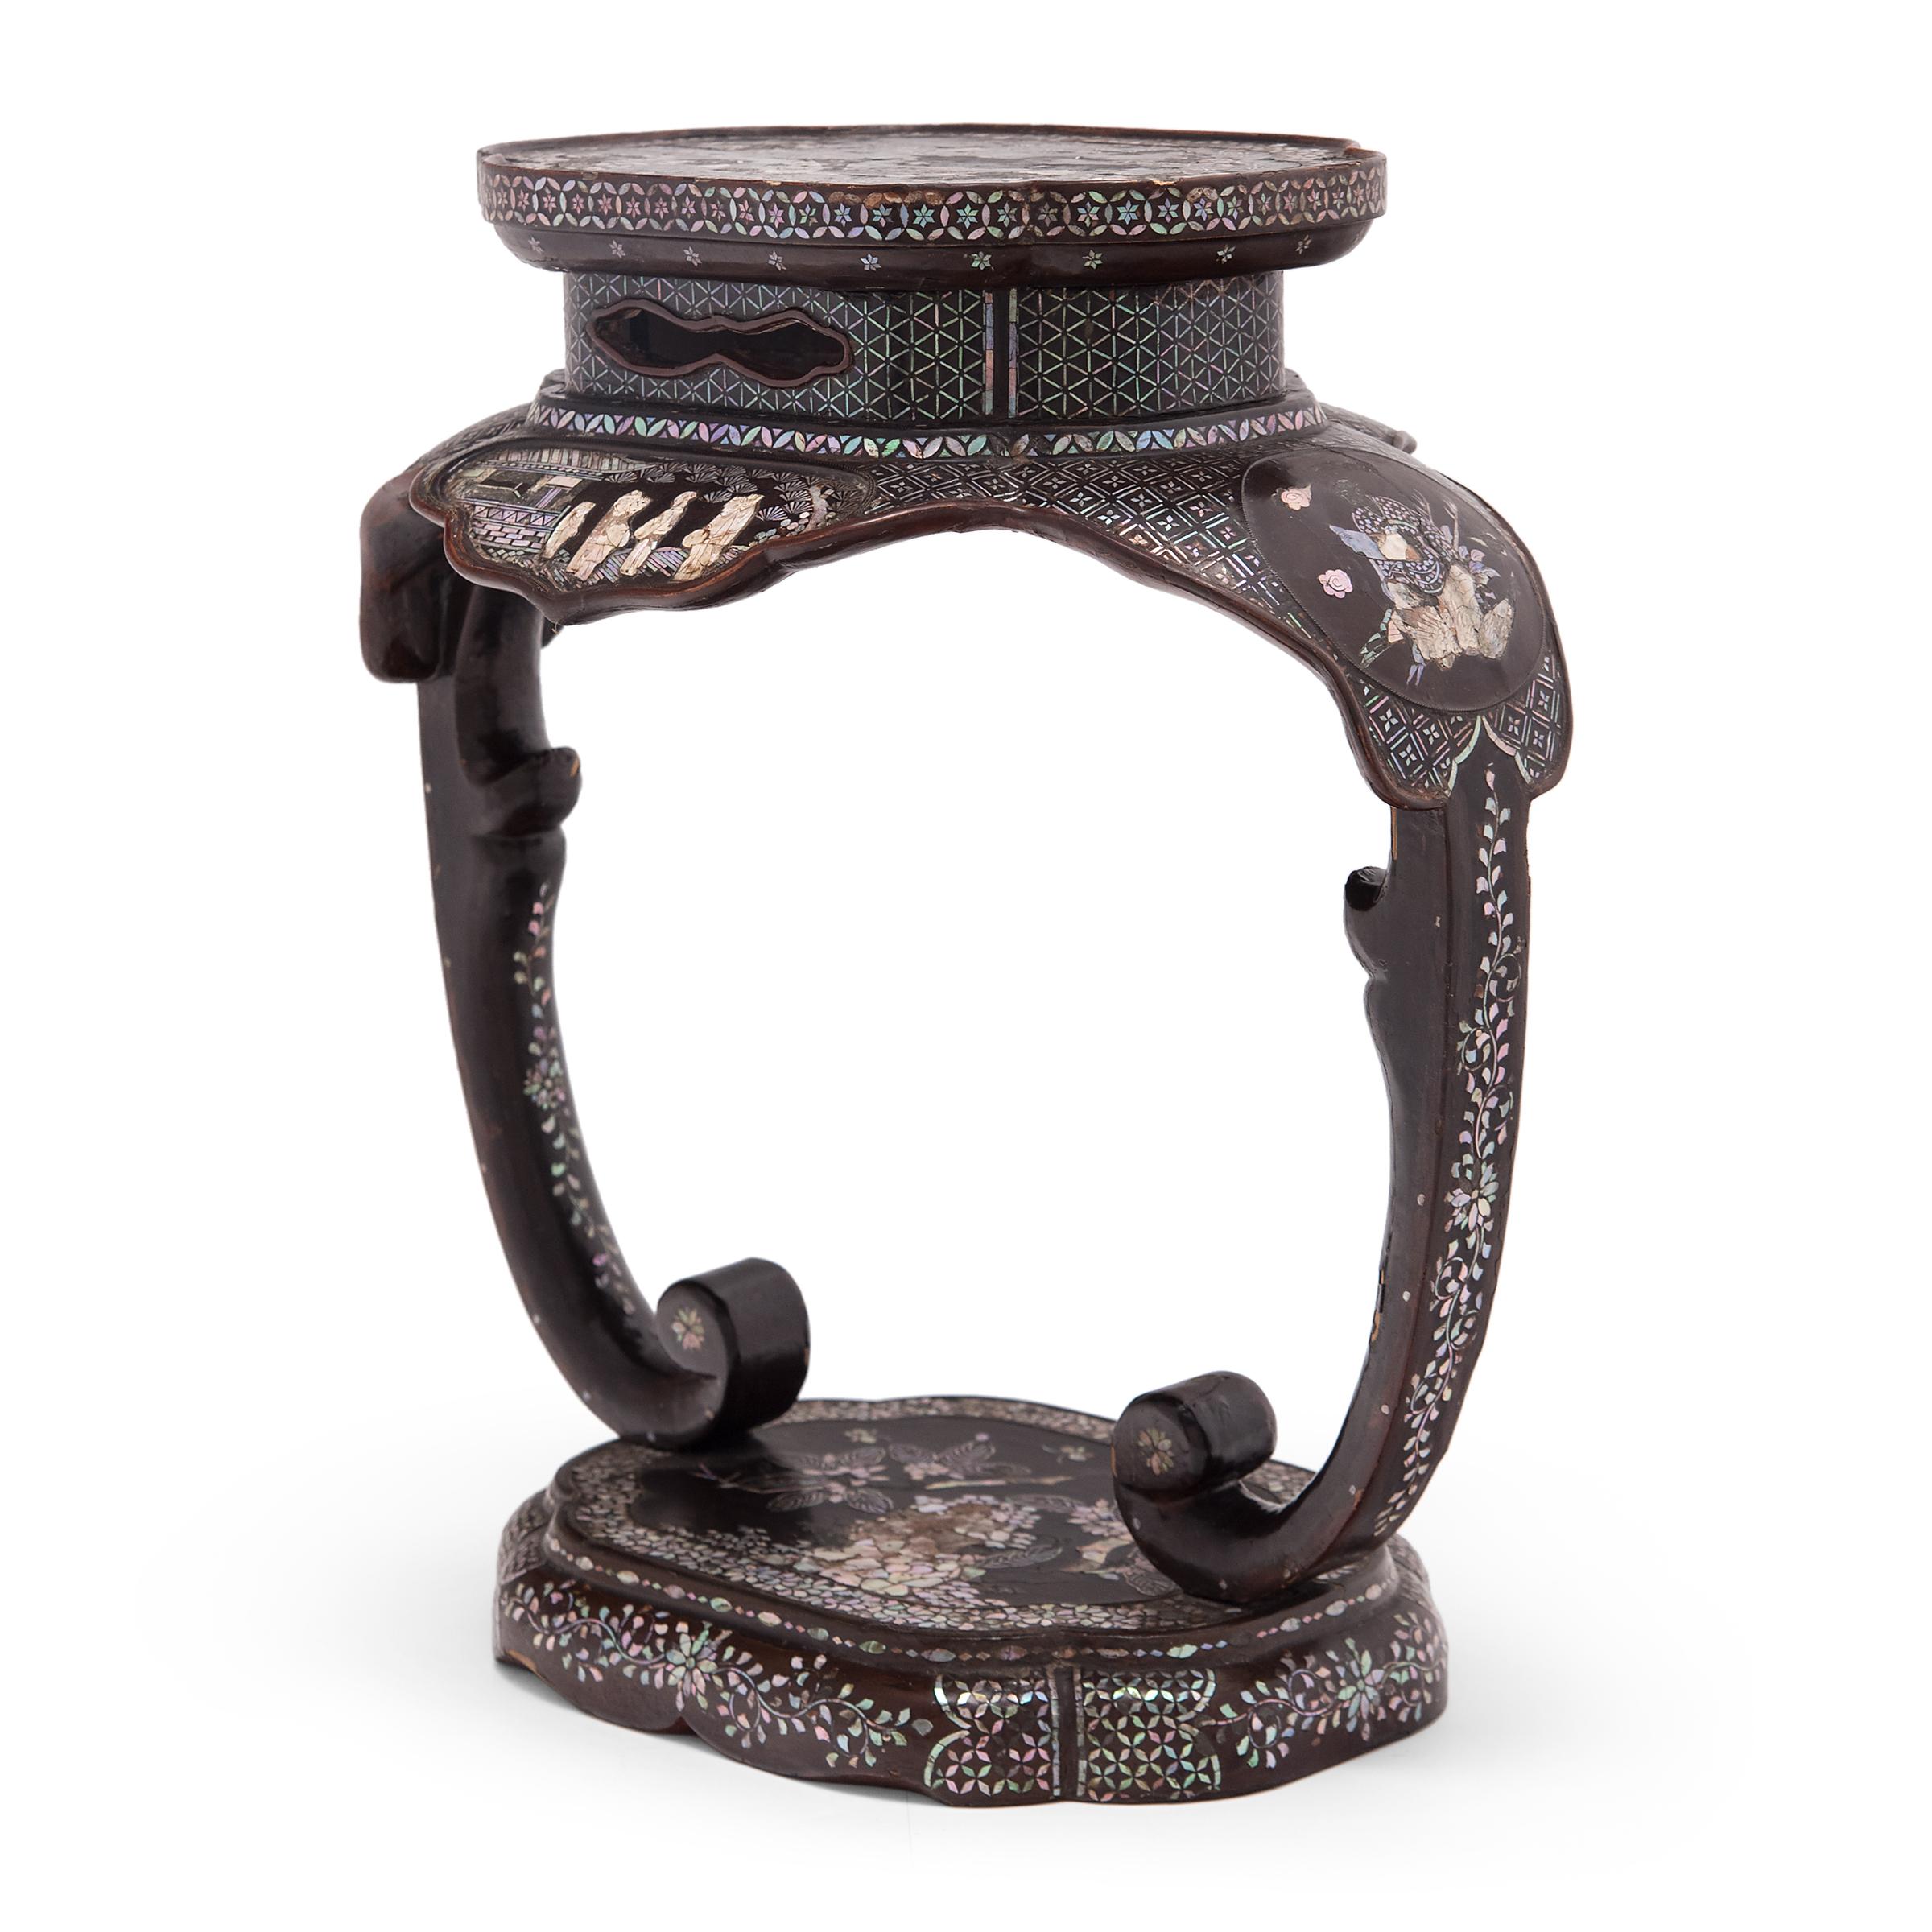 This ornate Korean stool was crafted in the early 20th century of lacquered papier-mâché with beautiful mother-of-pearl inlay, a decorative technique known as 